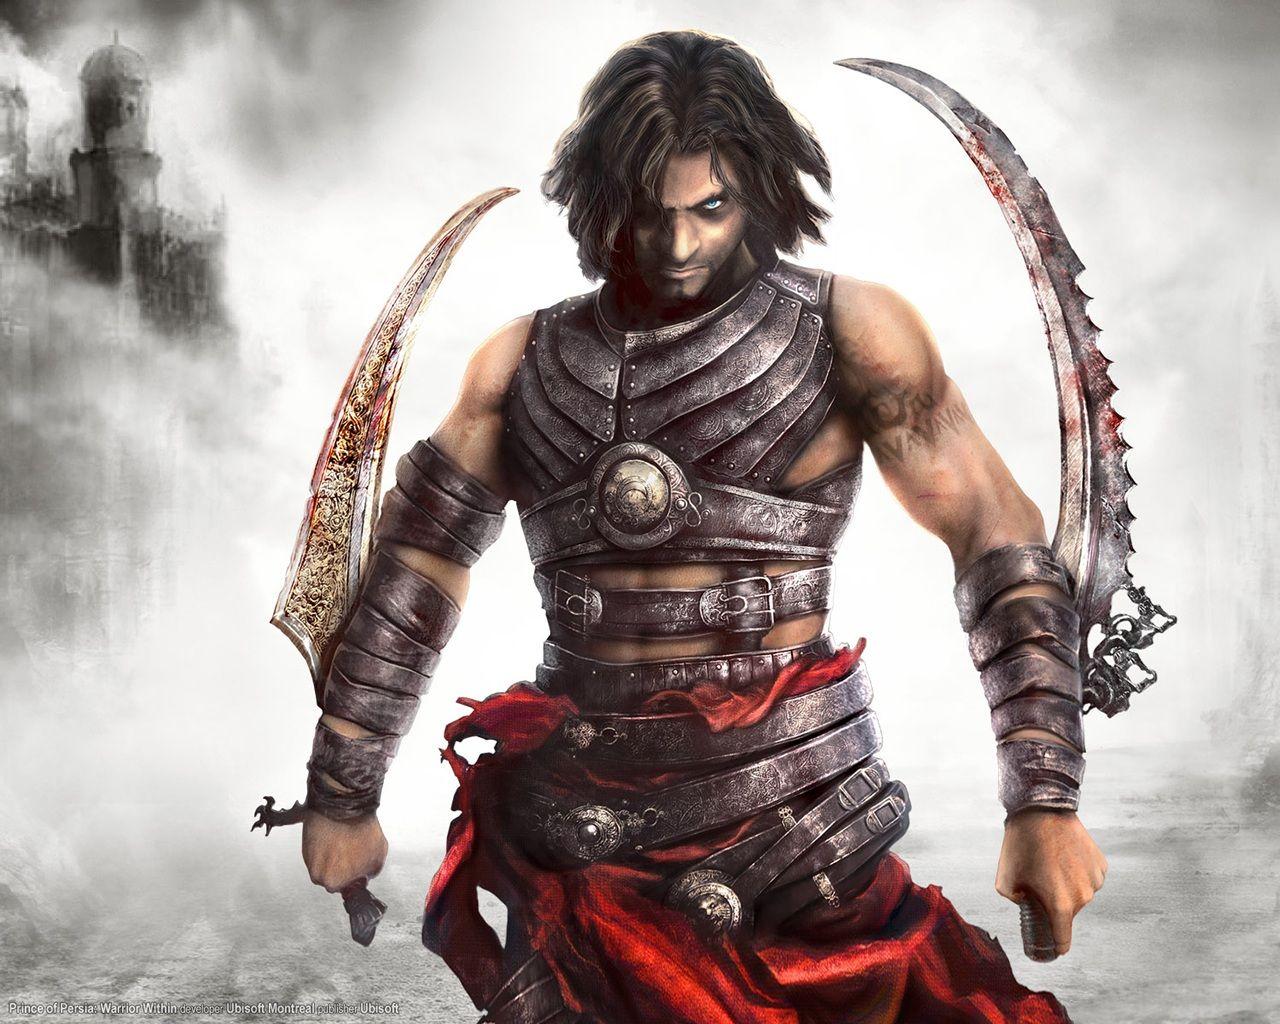 Prince of Persia: Warrior Within (Video Game) Wallpaper (1280 x 1024